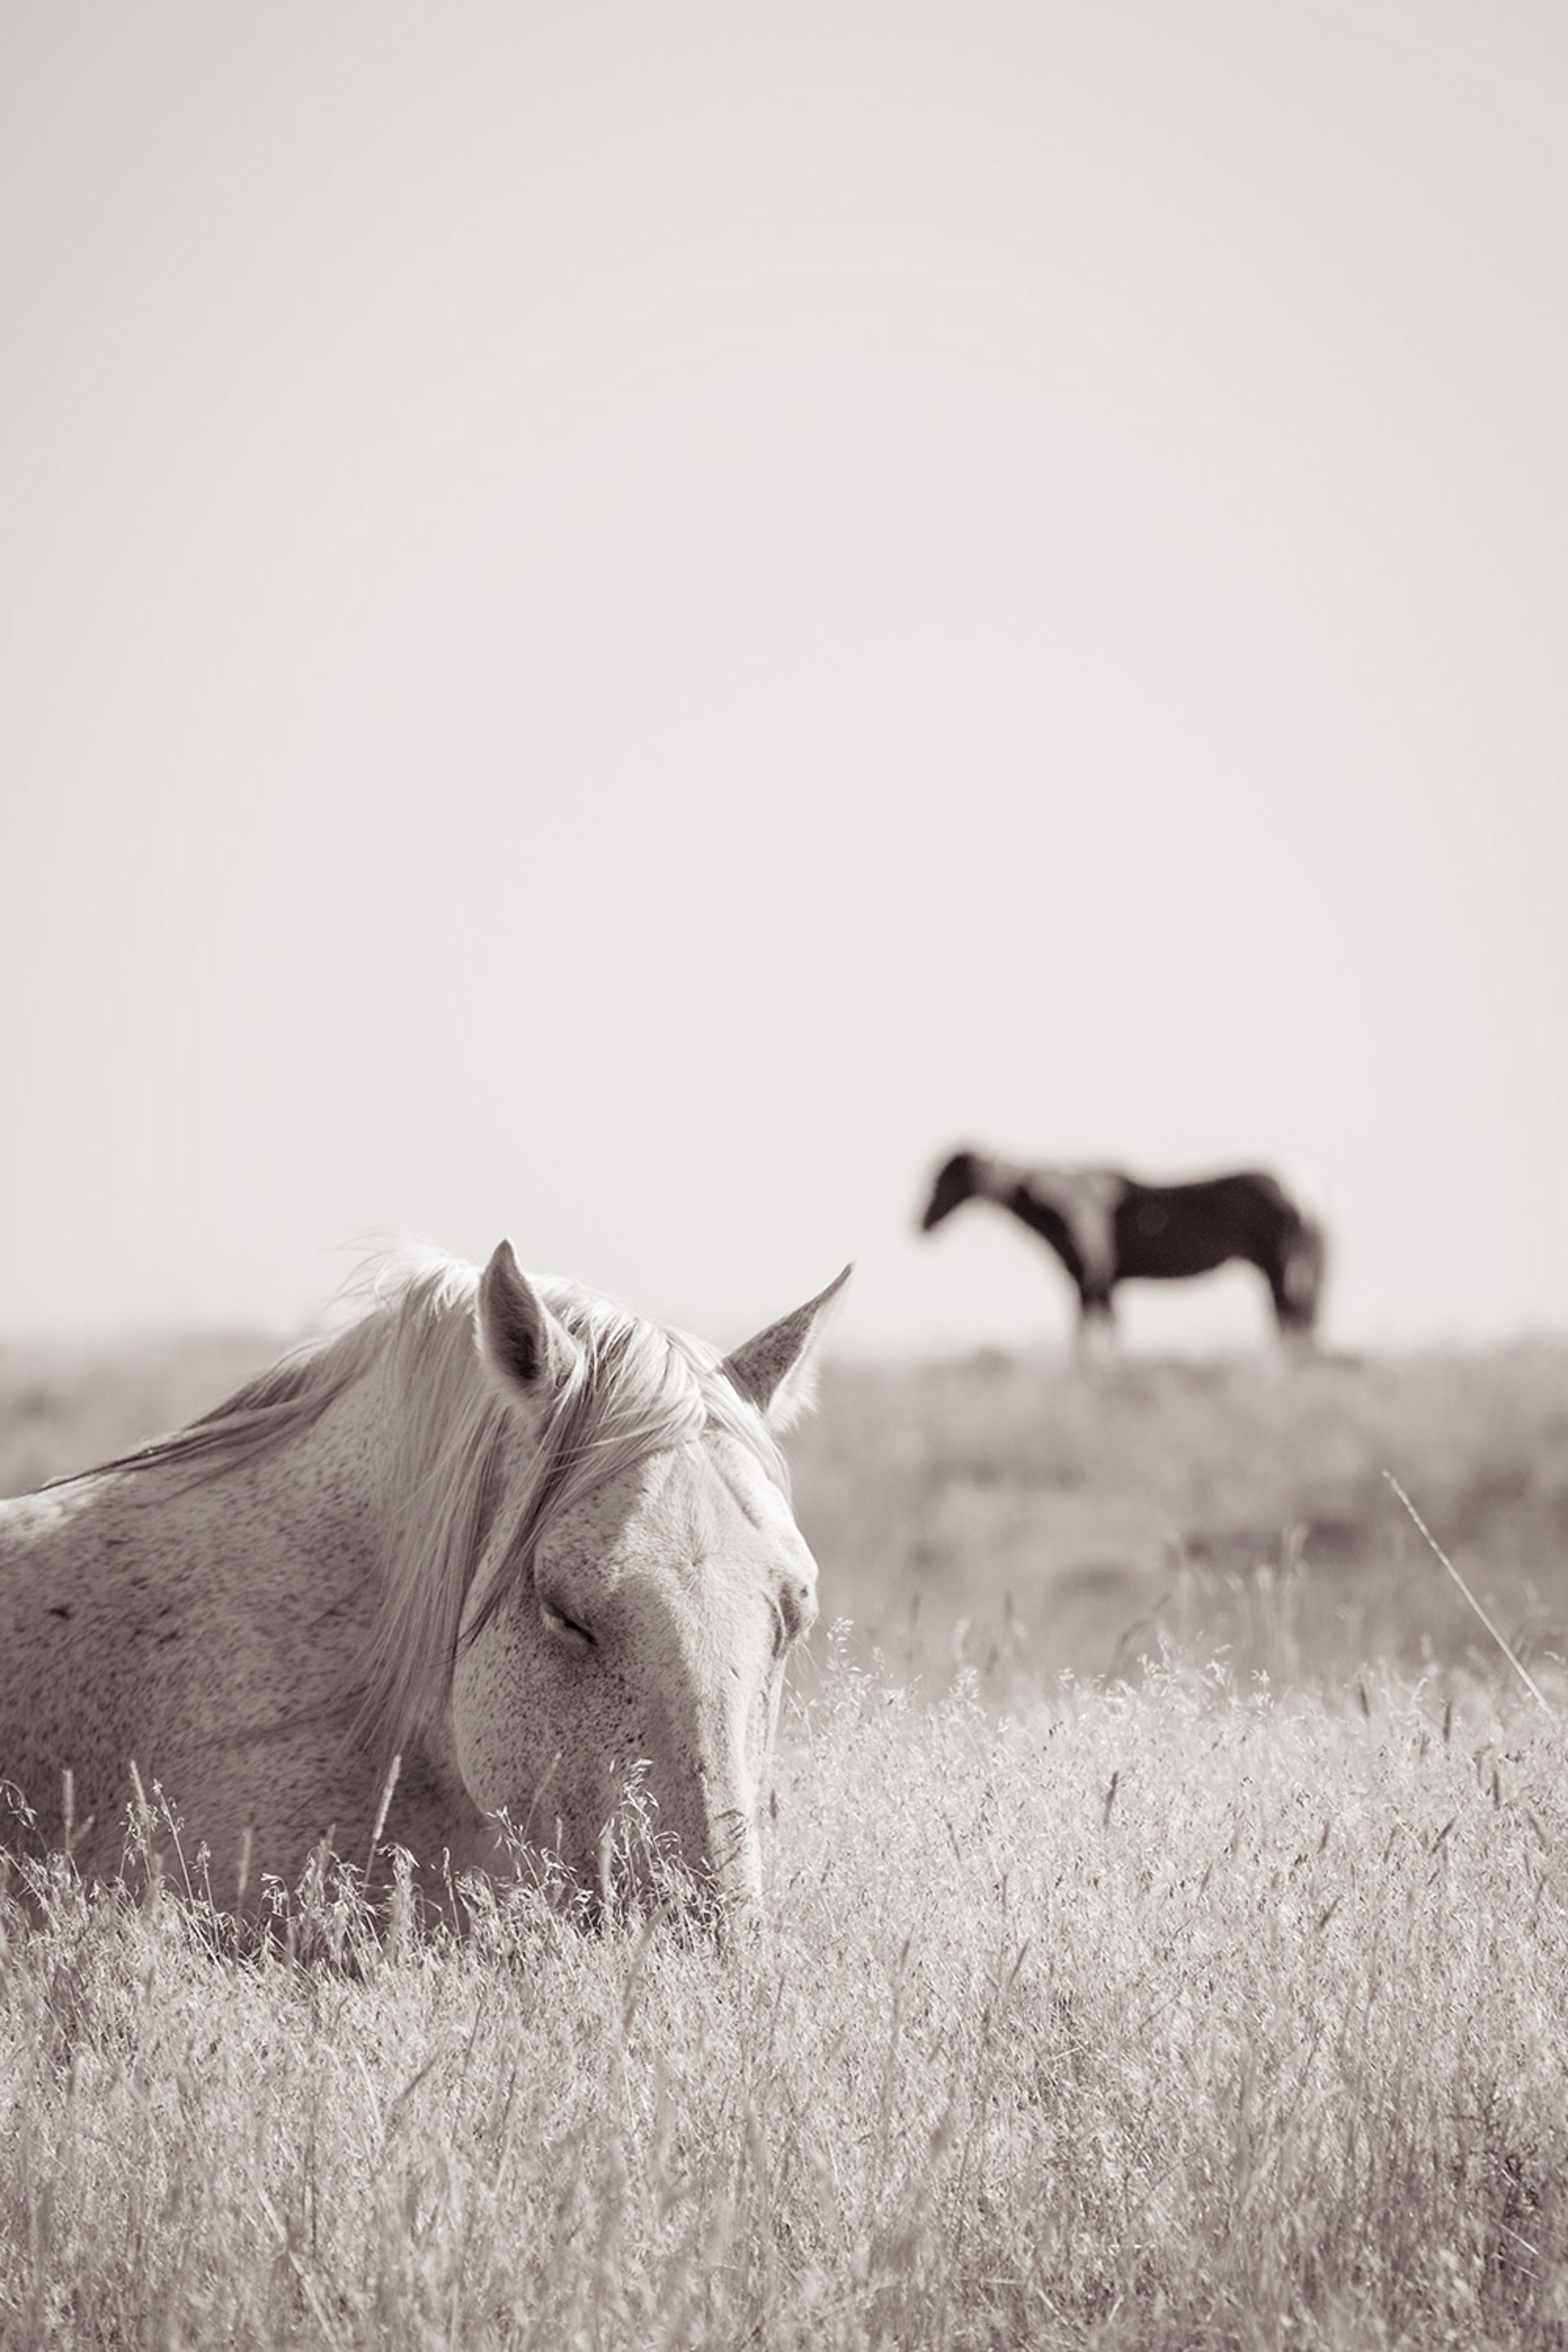 Photograph Featuring White Sleeping Horse In Grass In Black And White Sepia Tone